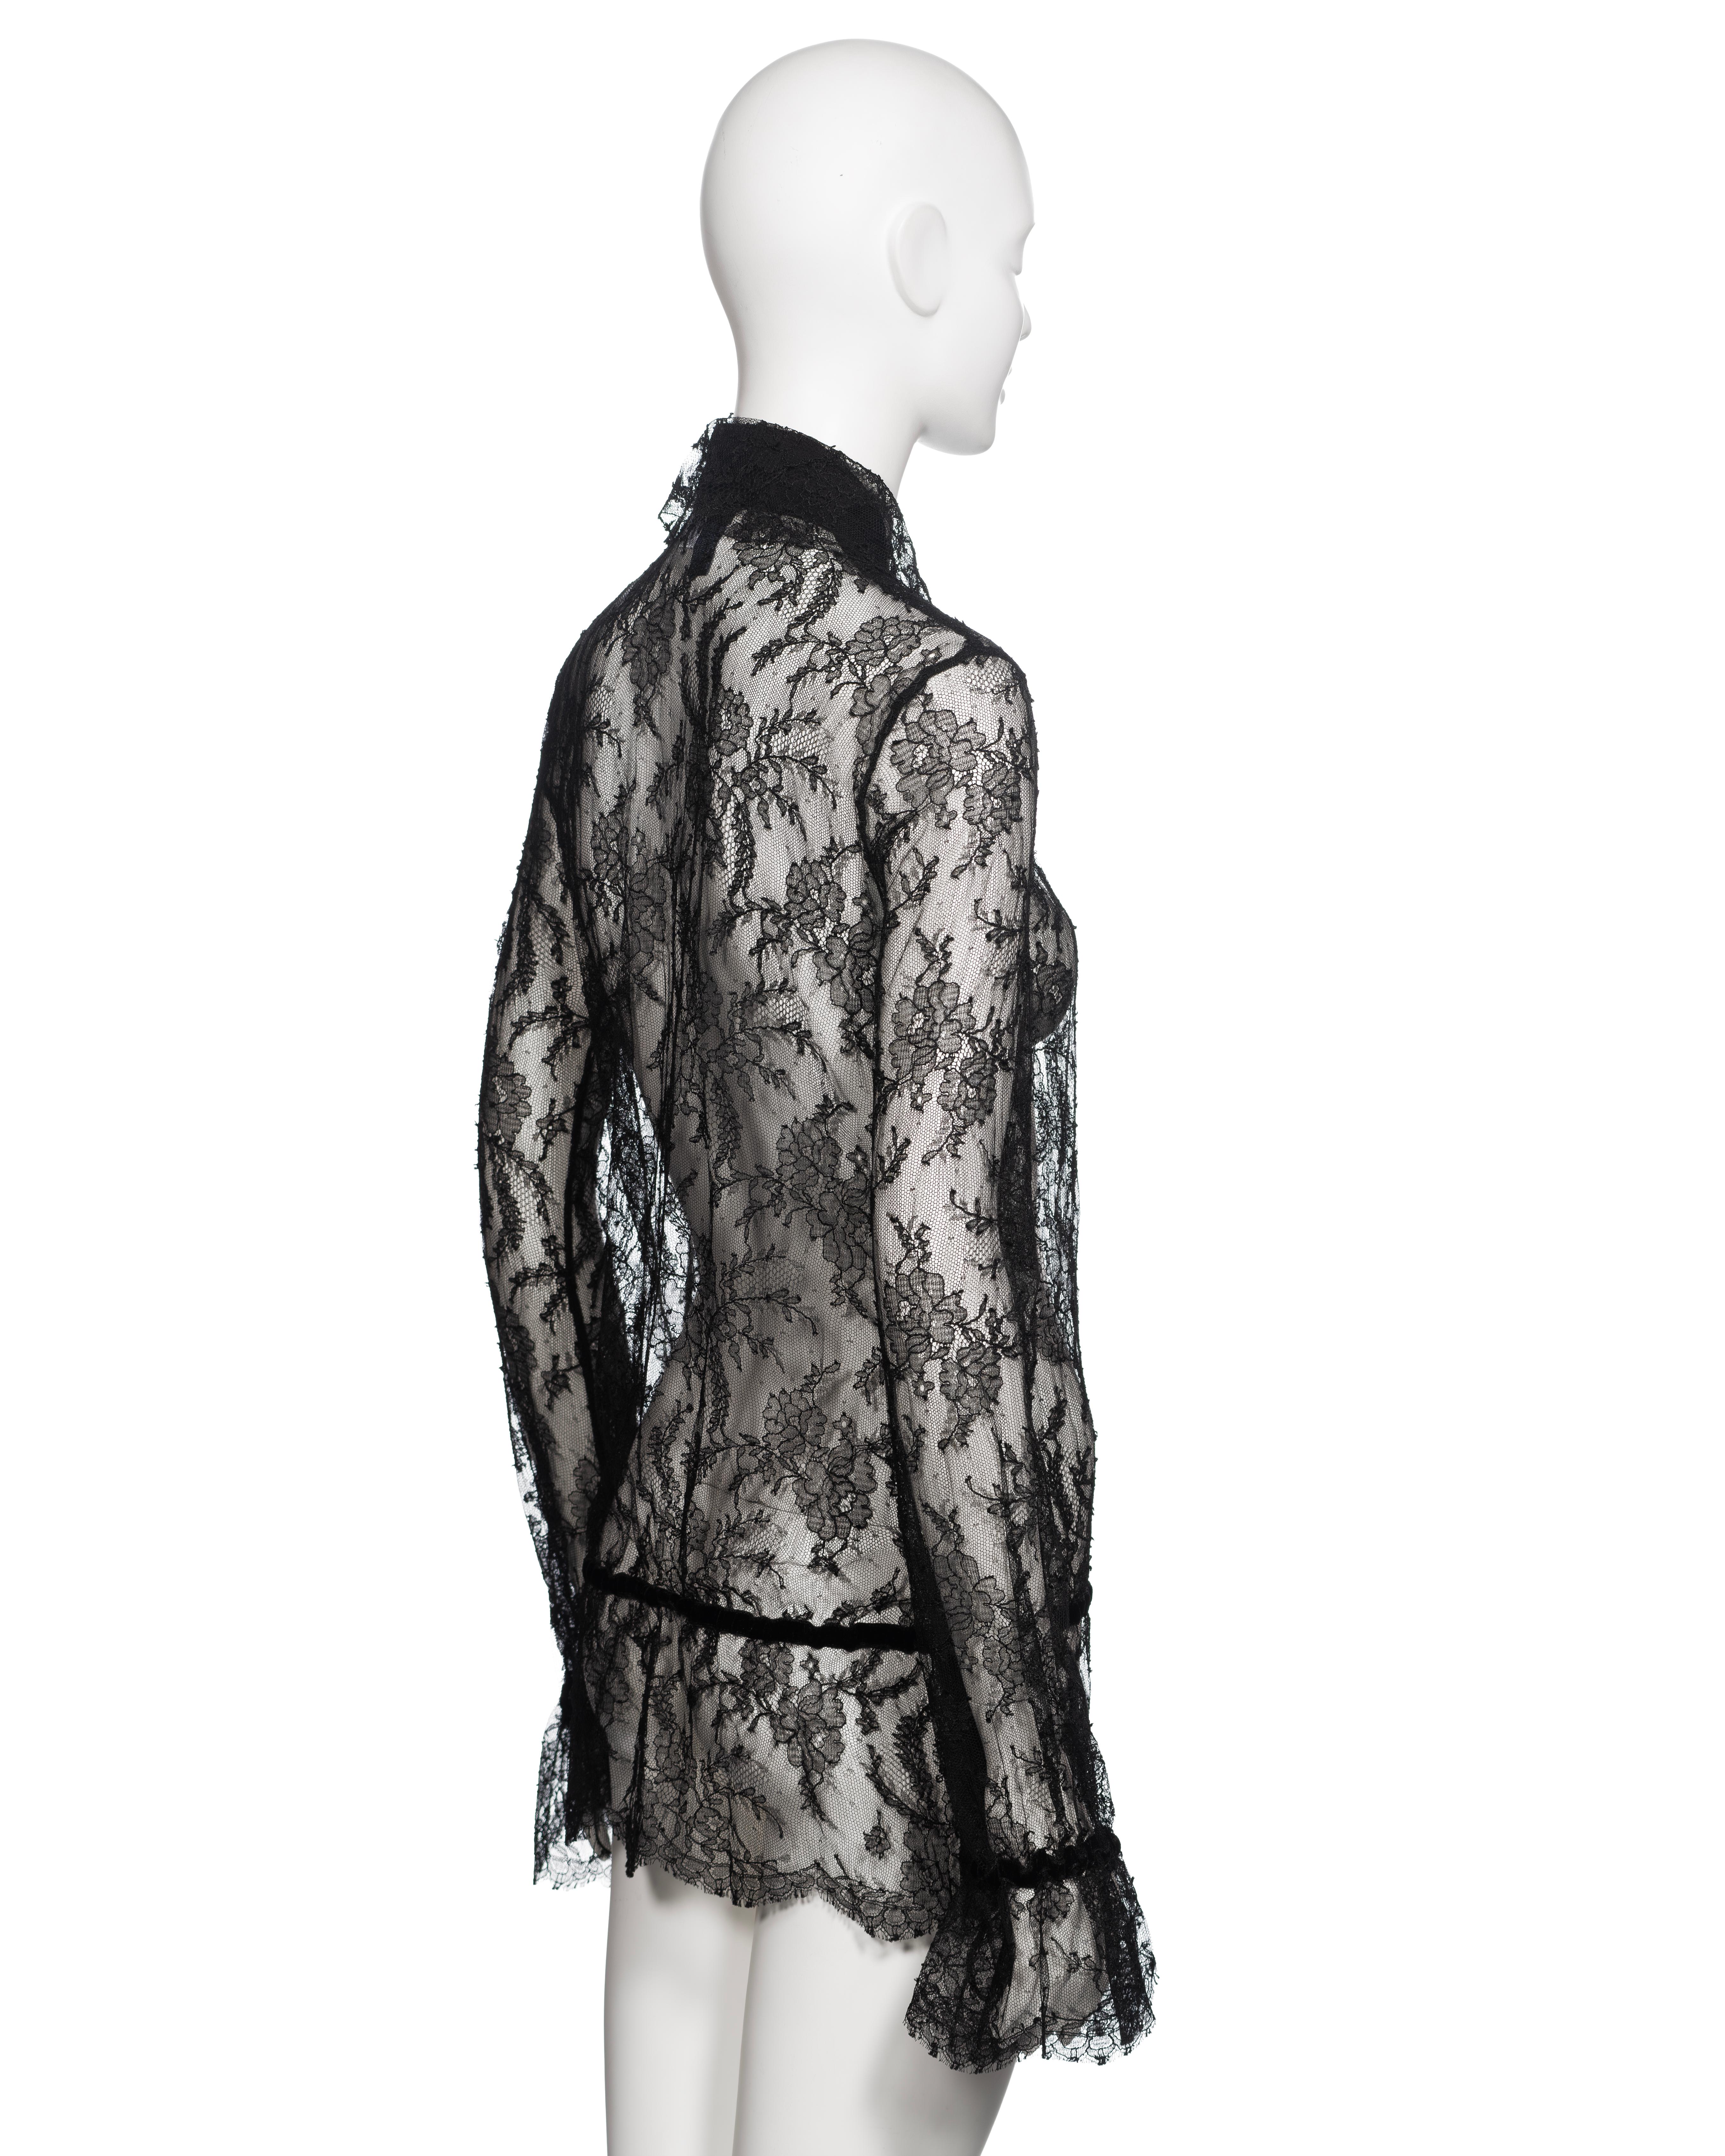 Chanel by Karl Lagerfeld Black Lace Blouse with Velvet Ribbon Trim, FW 2004 2